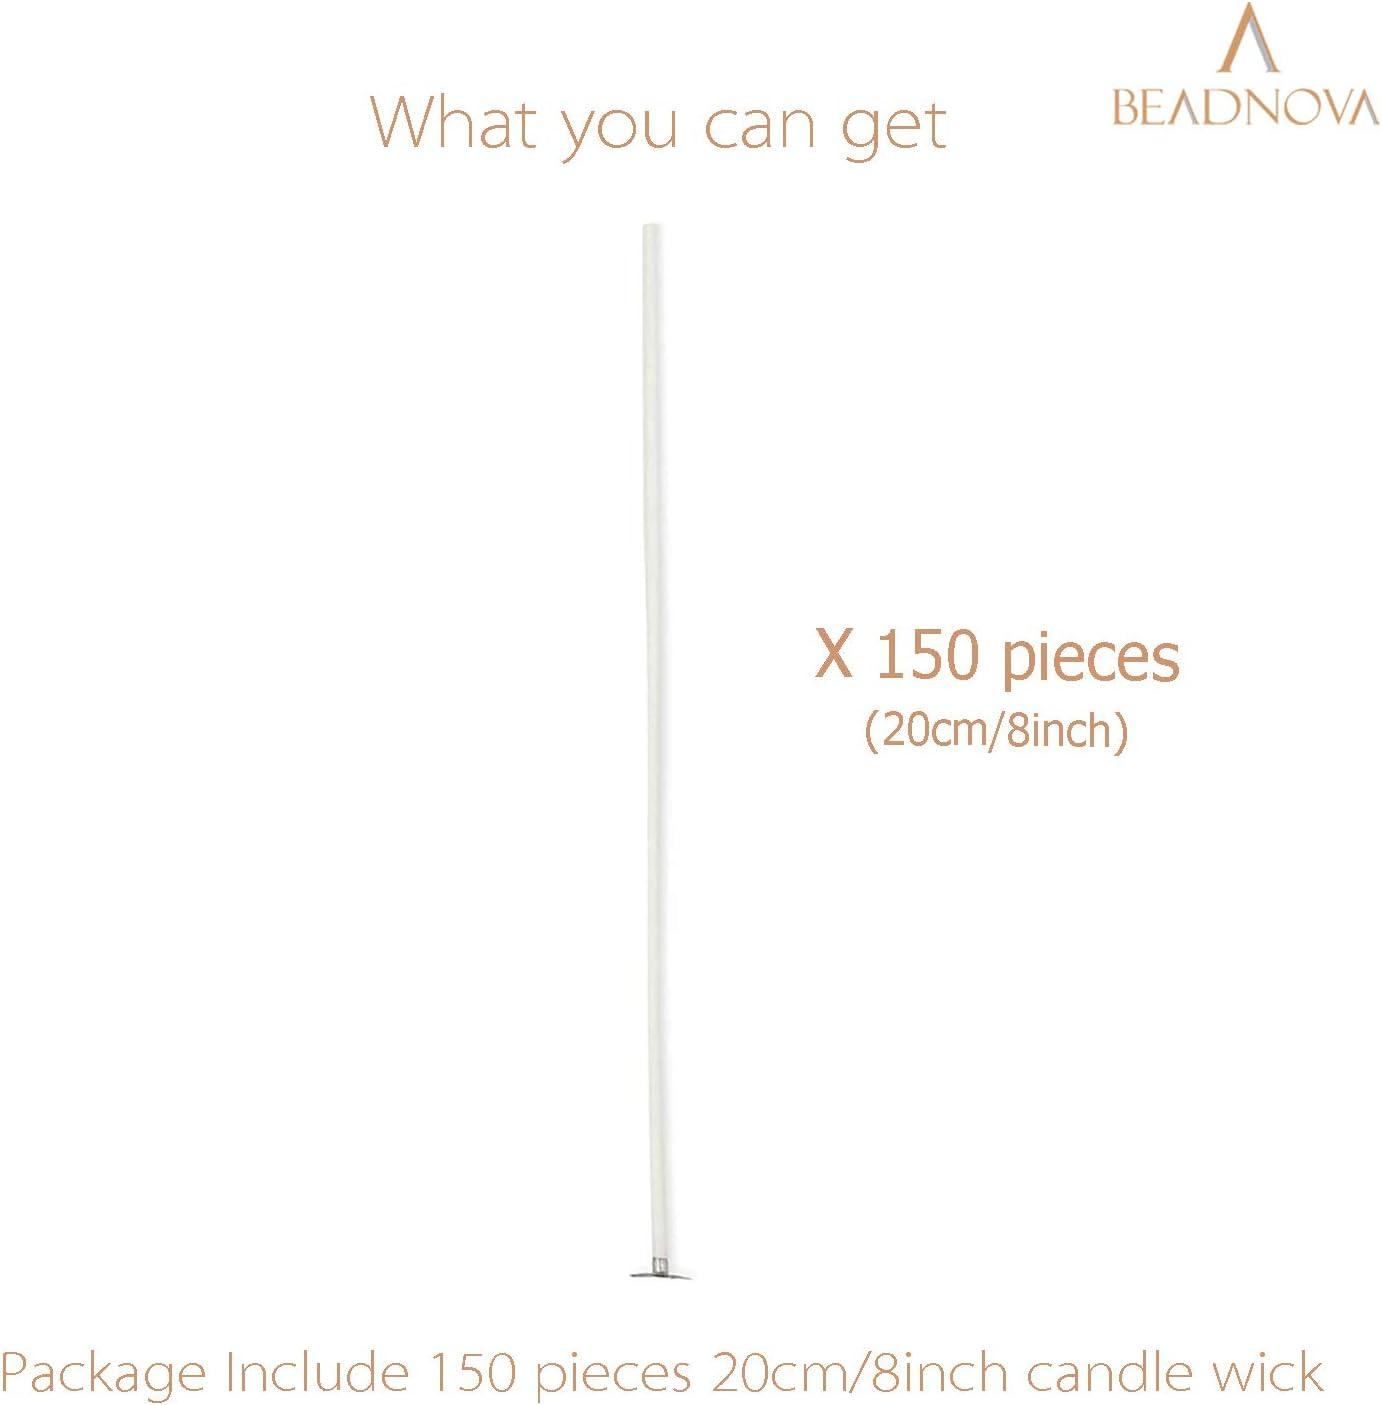 BEADNOVA Candle Wicks 8 Inch 150pcs Large Cotton Candle Wicks for Soy Wax  Candles Making Supplies 8inch, 20cm